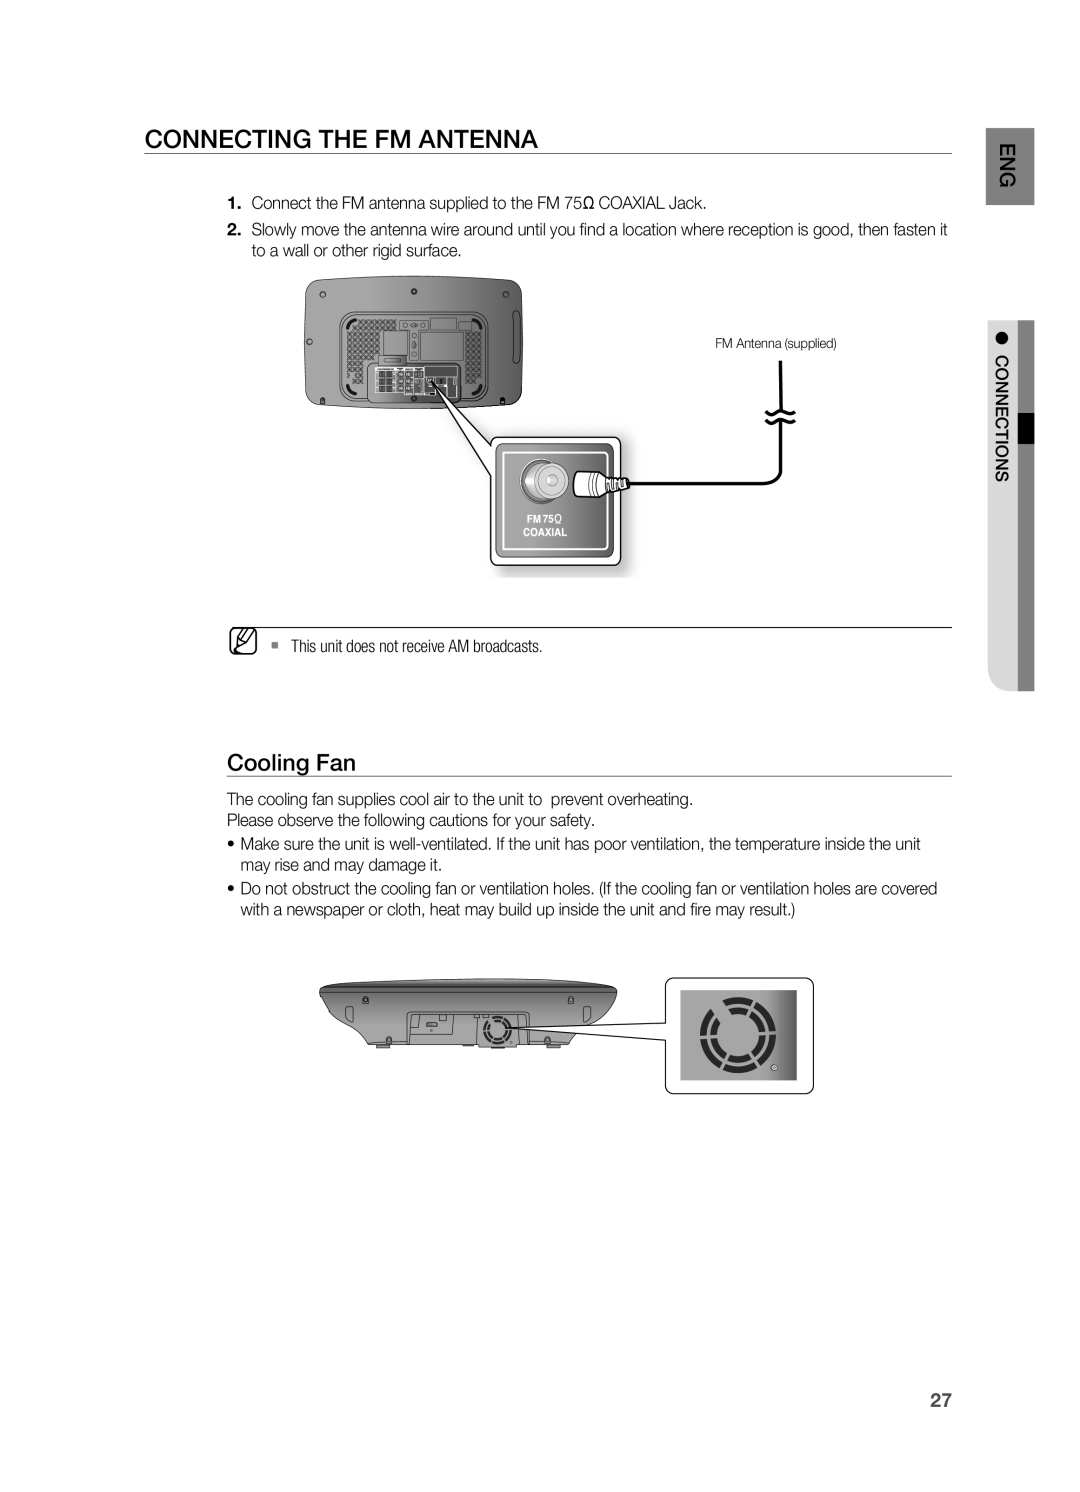 Samsung HT-TX715 user manual Connecting The Fm Antenna, Cooling Fan 